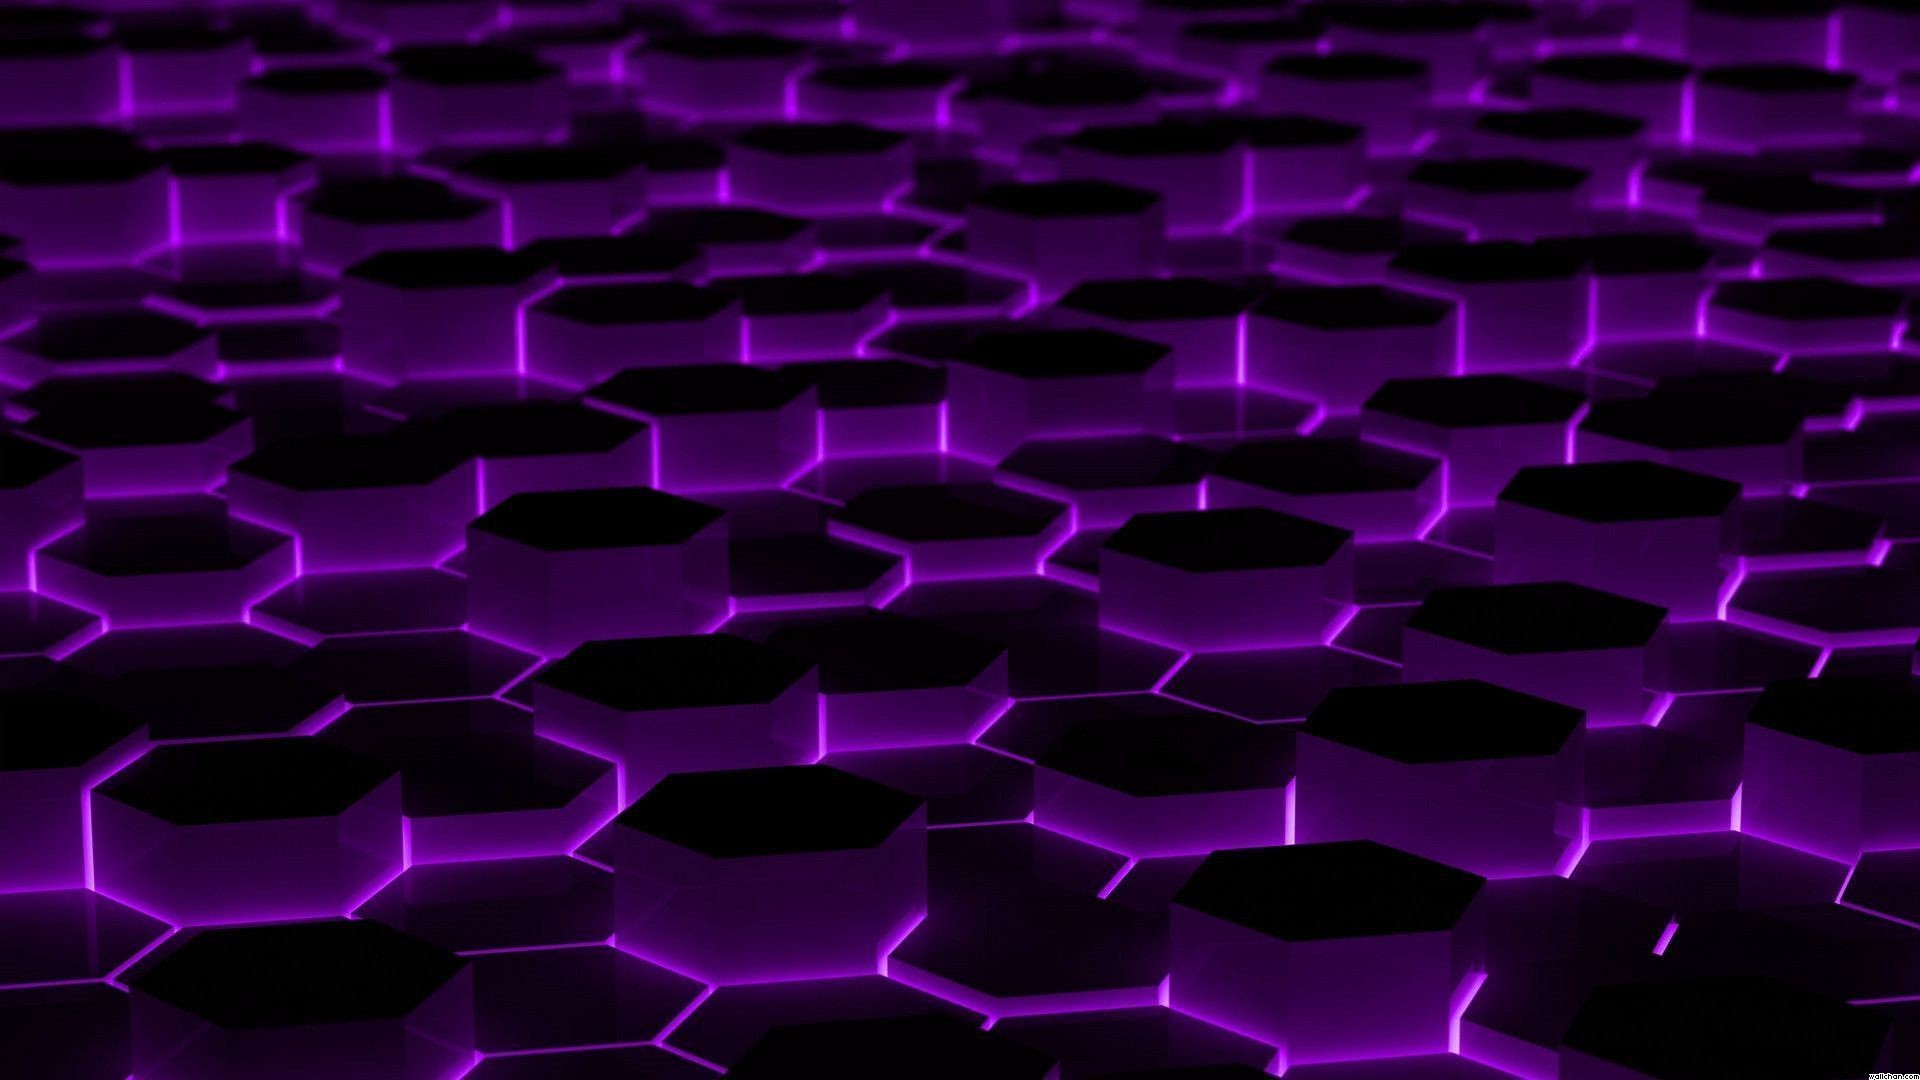 260 Purple HD Wallpapers and Backgrounds